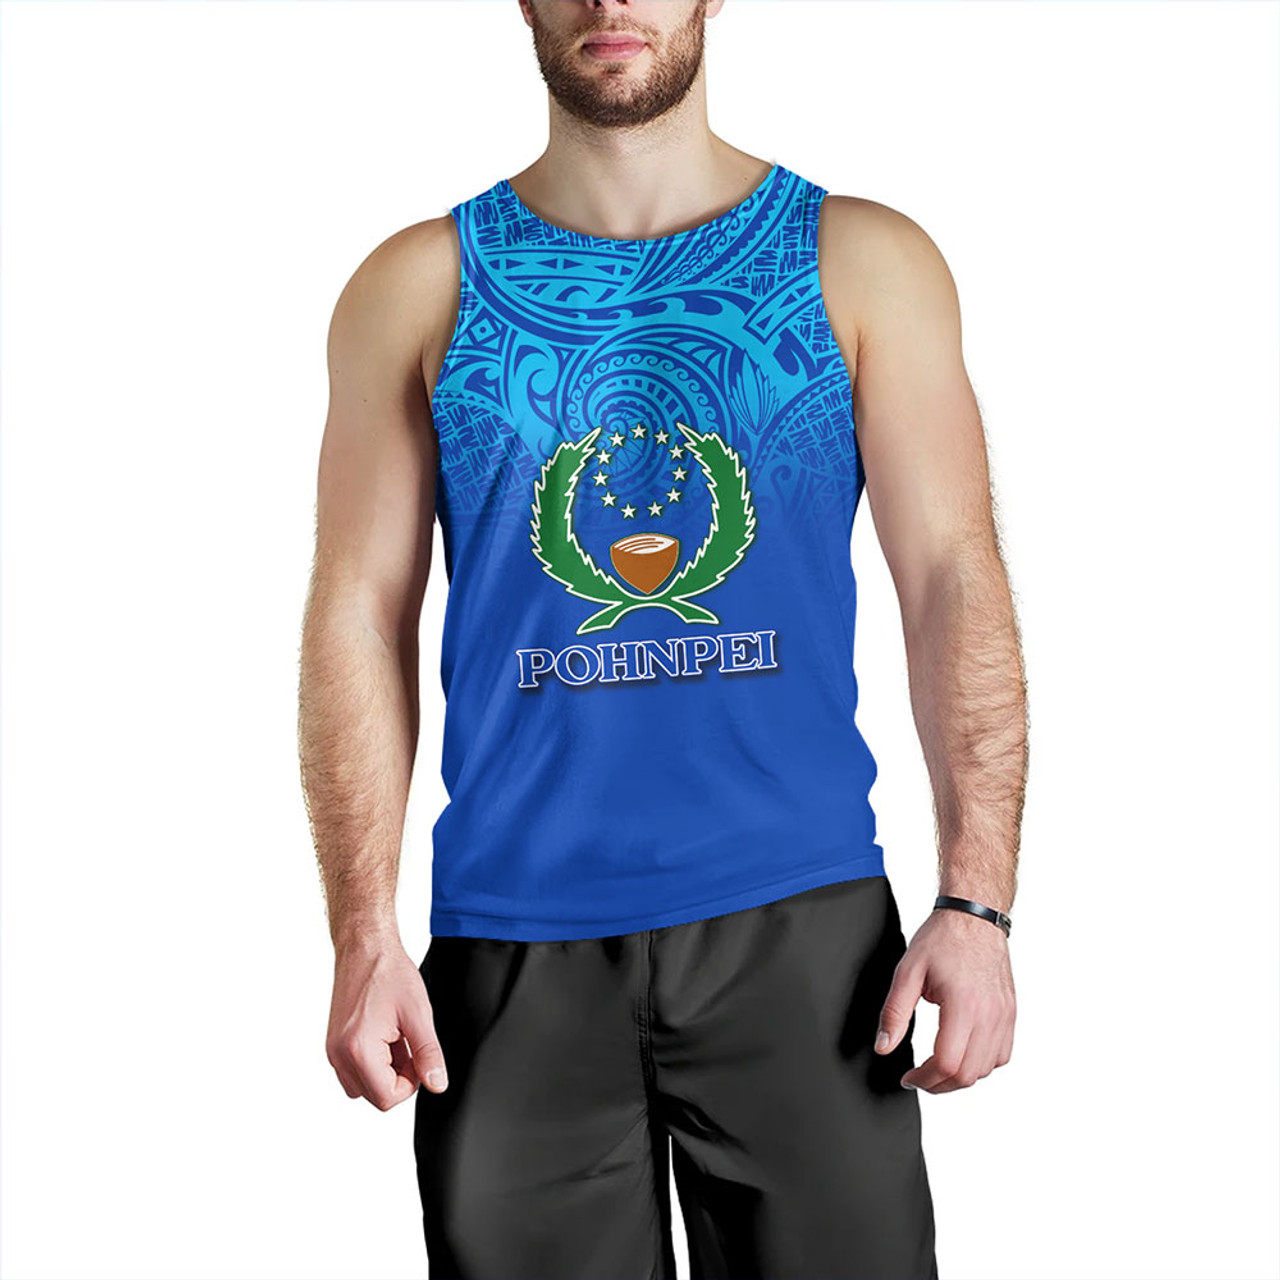 Pohnpei State Tank Top Flag Color With Traditional Patterns